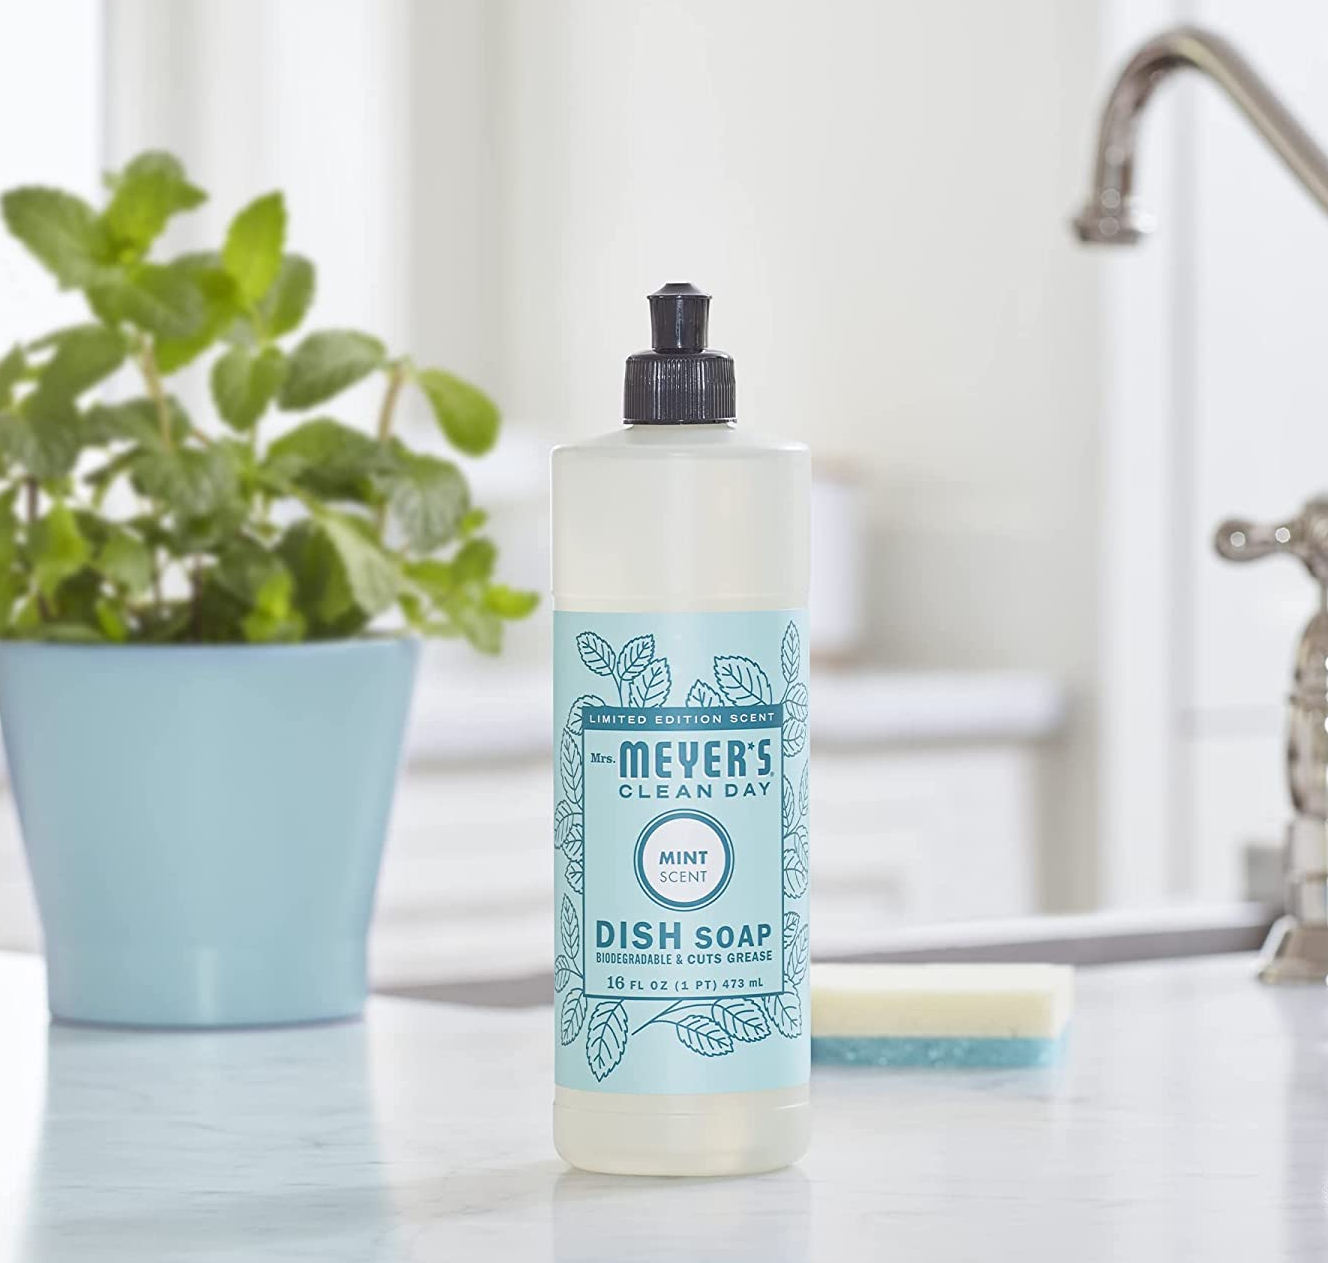 12 Spring-Scented Cleaning Products to Freshen Up Your Space